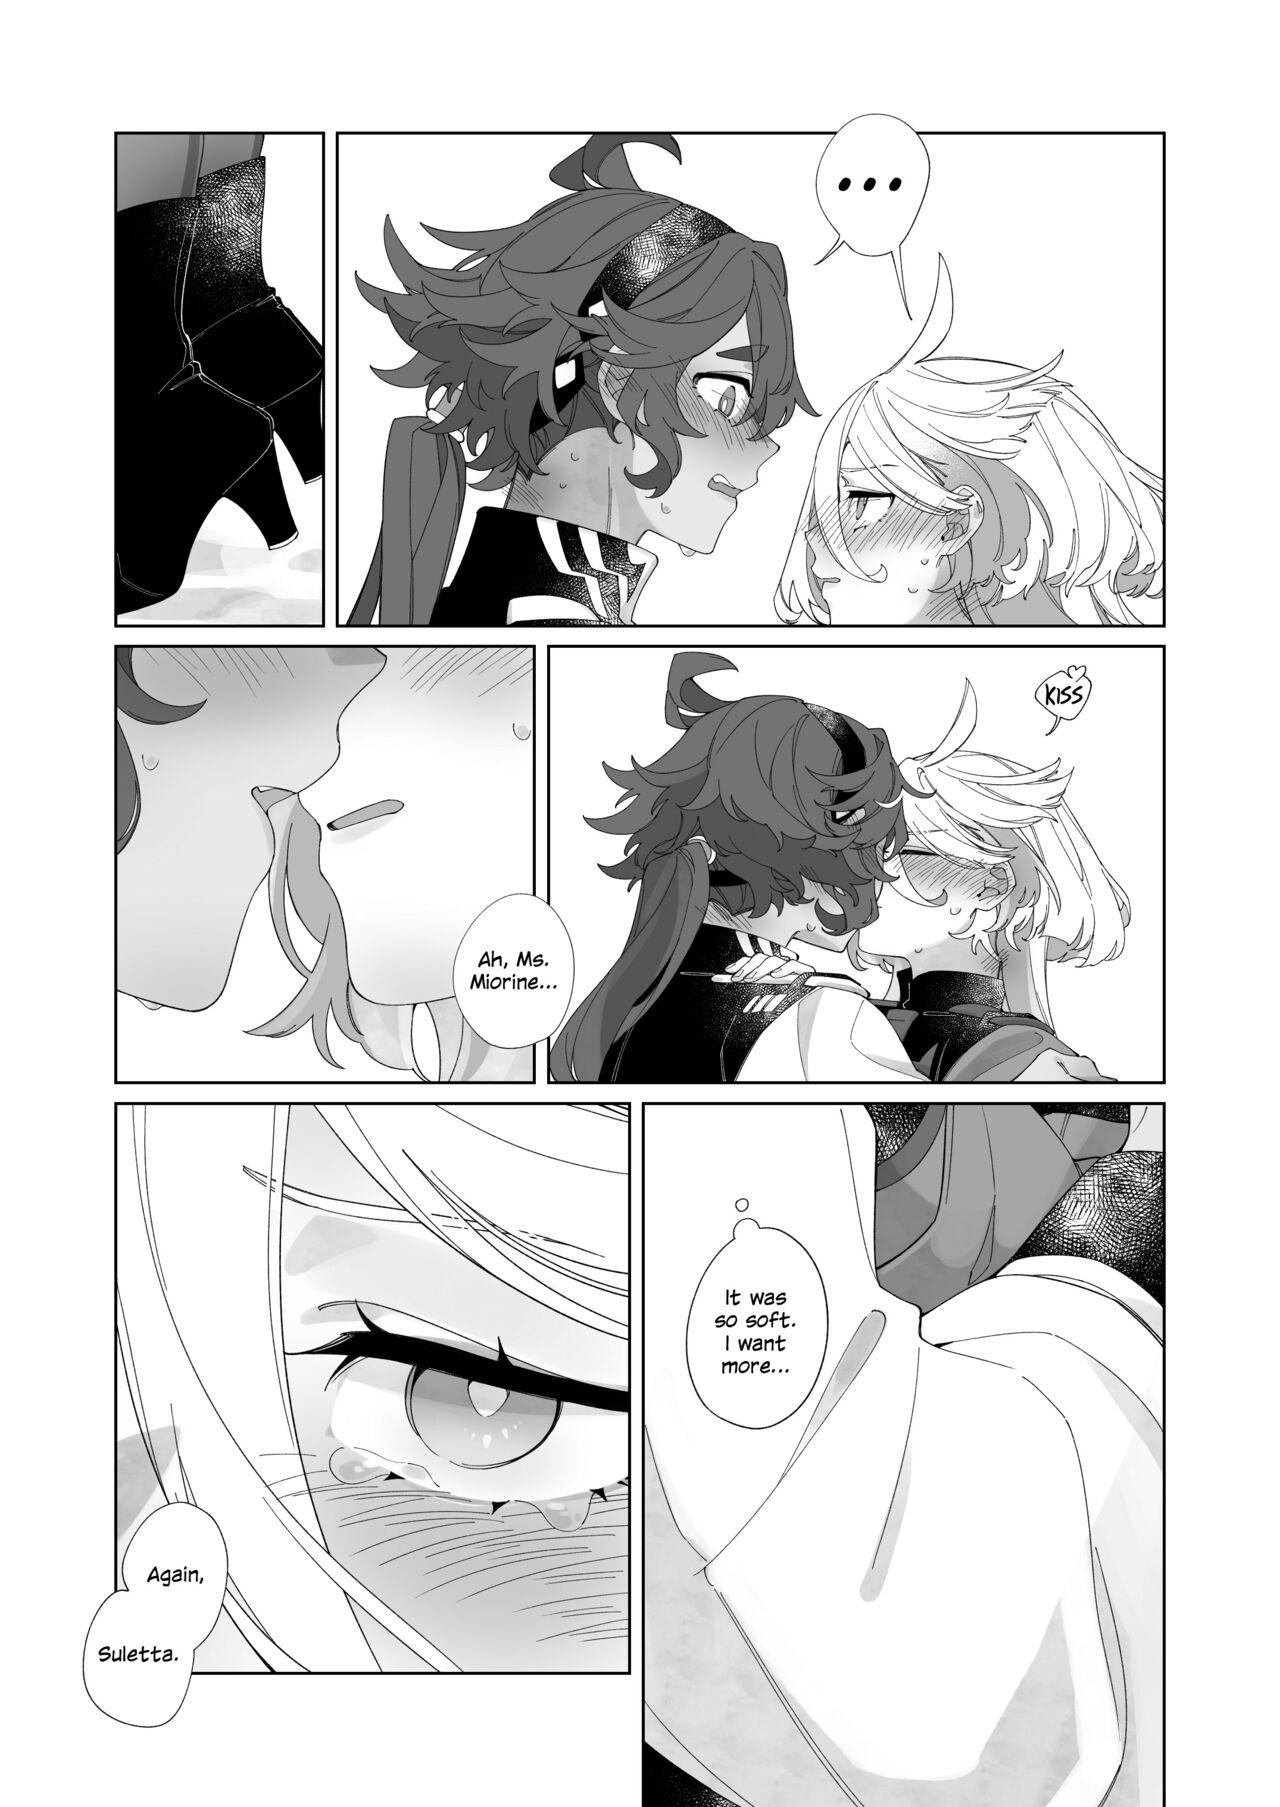 Couch Kiss no Ato Nani ga Shitai? | After Kissing, What Else Do You Want to Do? - Mobile suit gundam the witch from mercury Step - Page 6